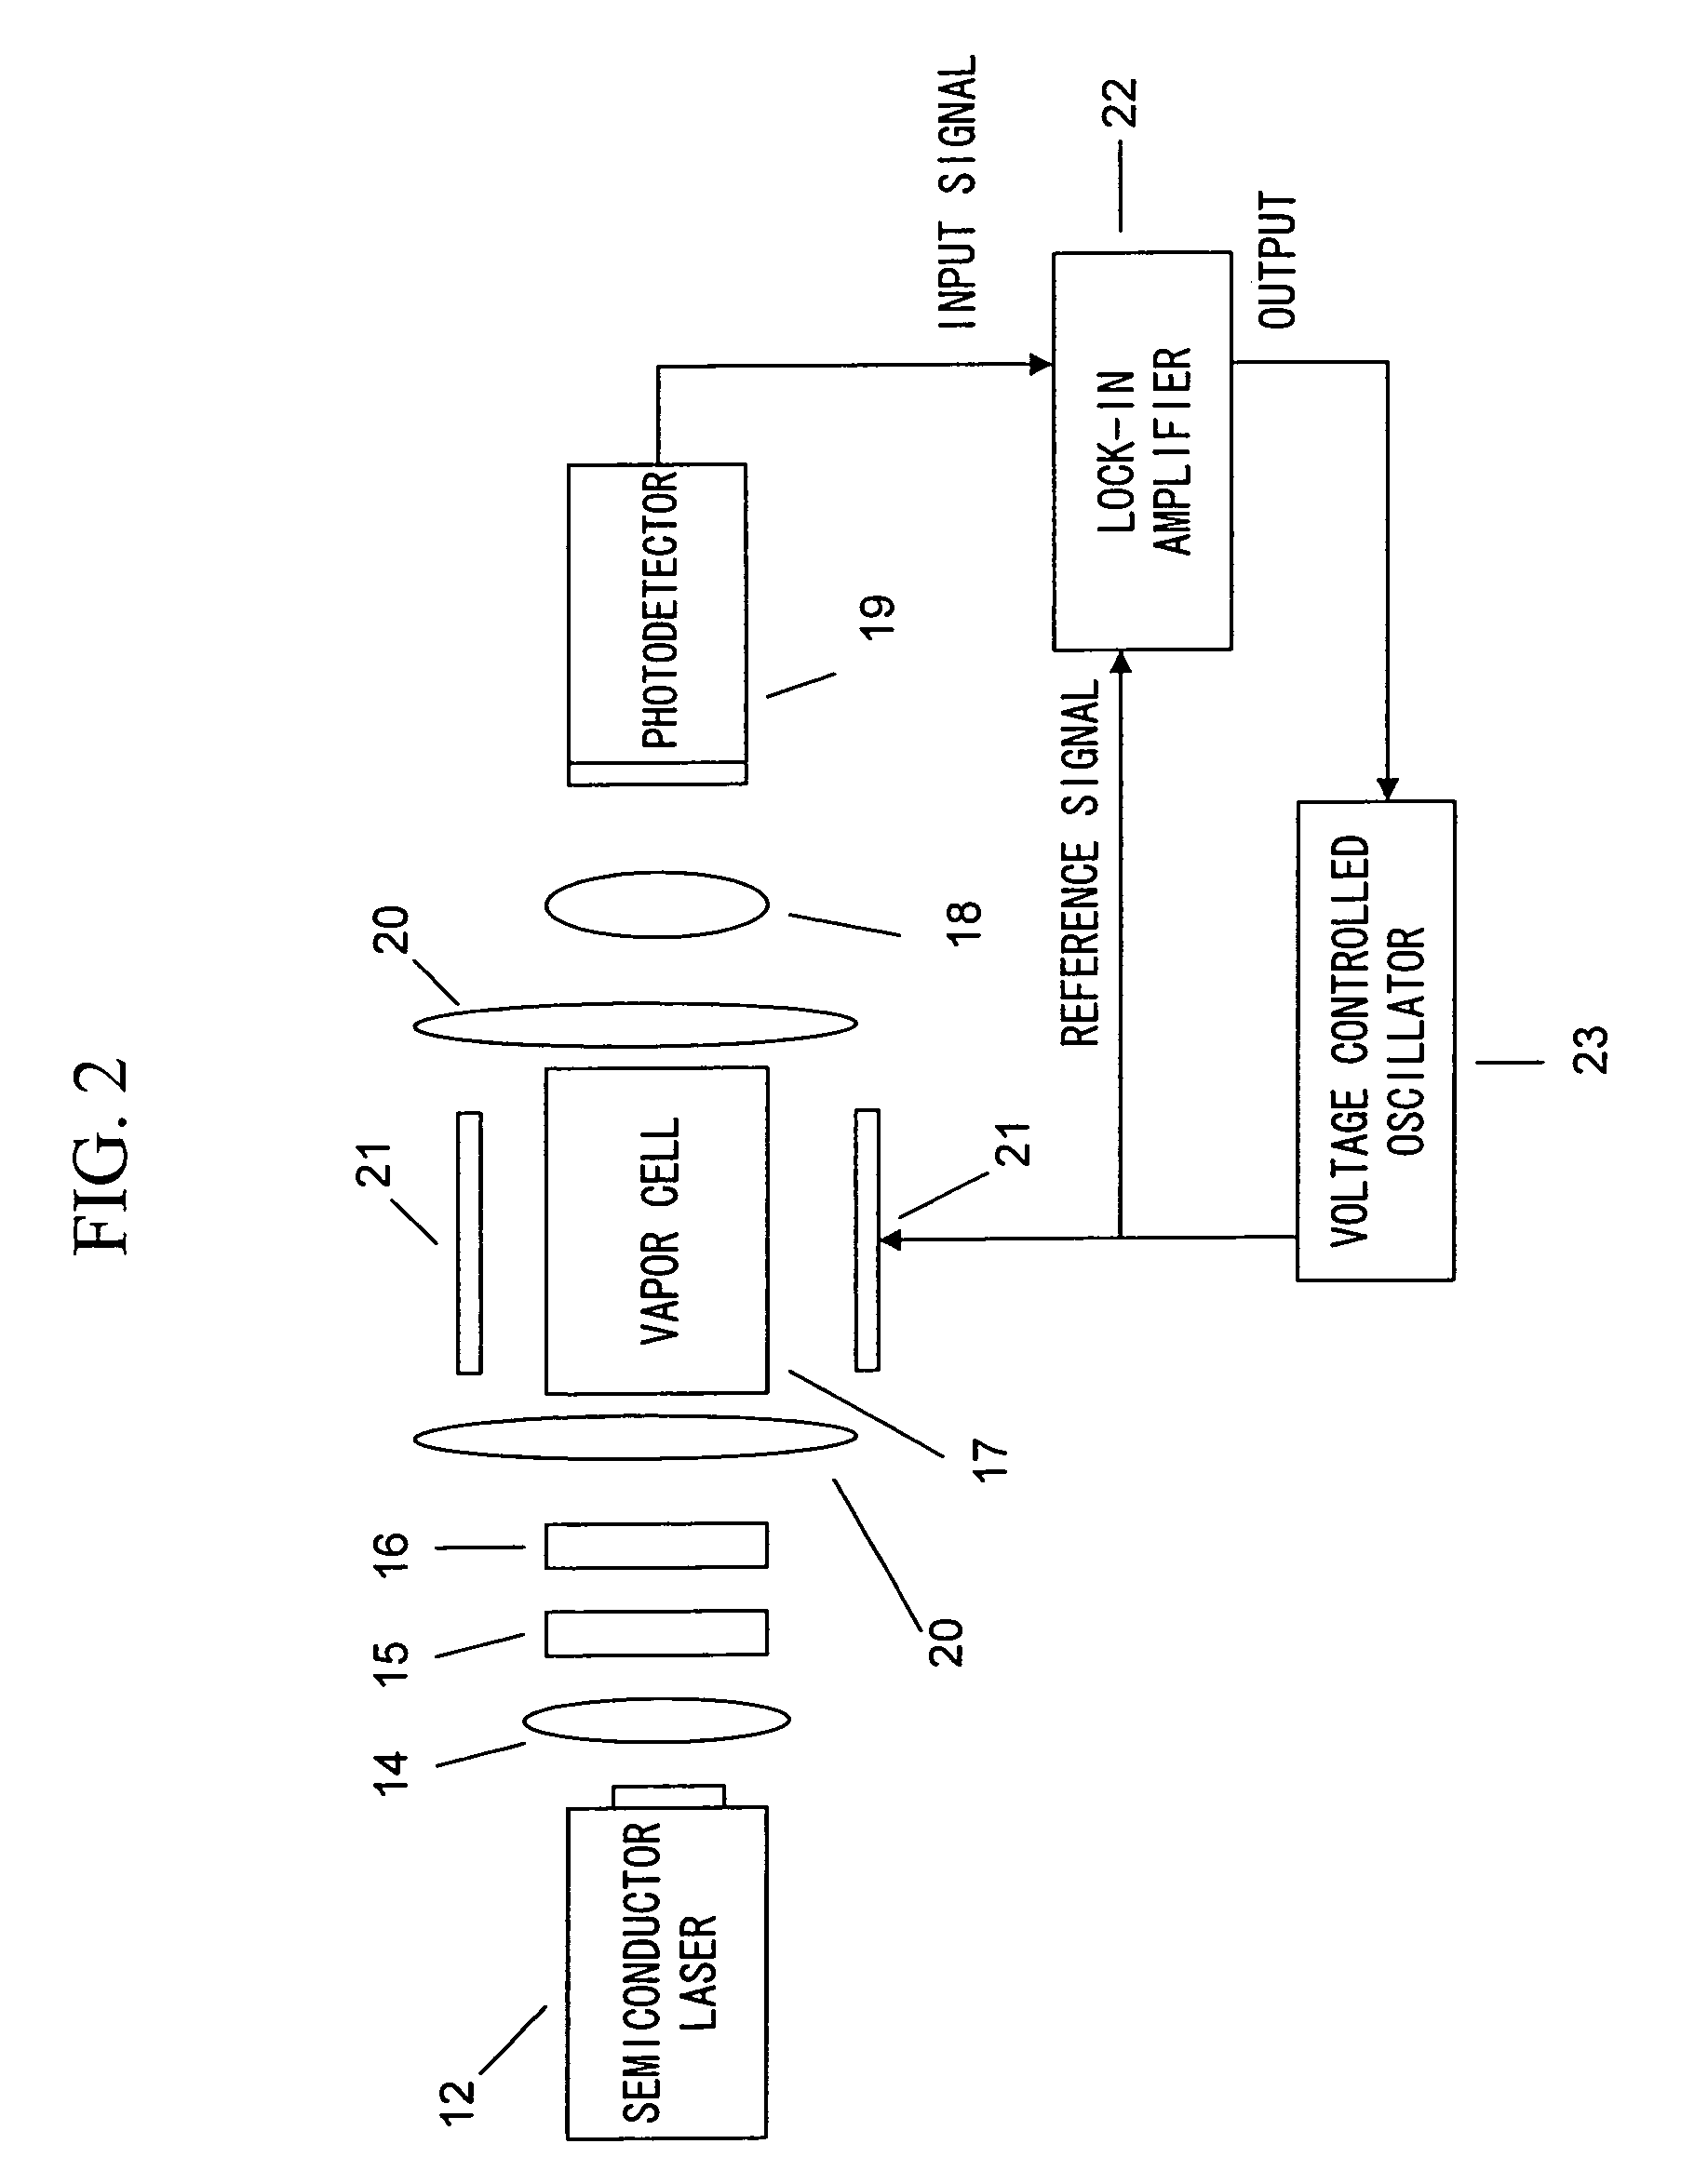 Magnetic field measurement system and optical pumping magnetometer